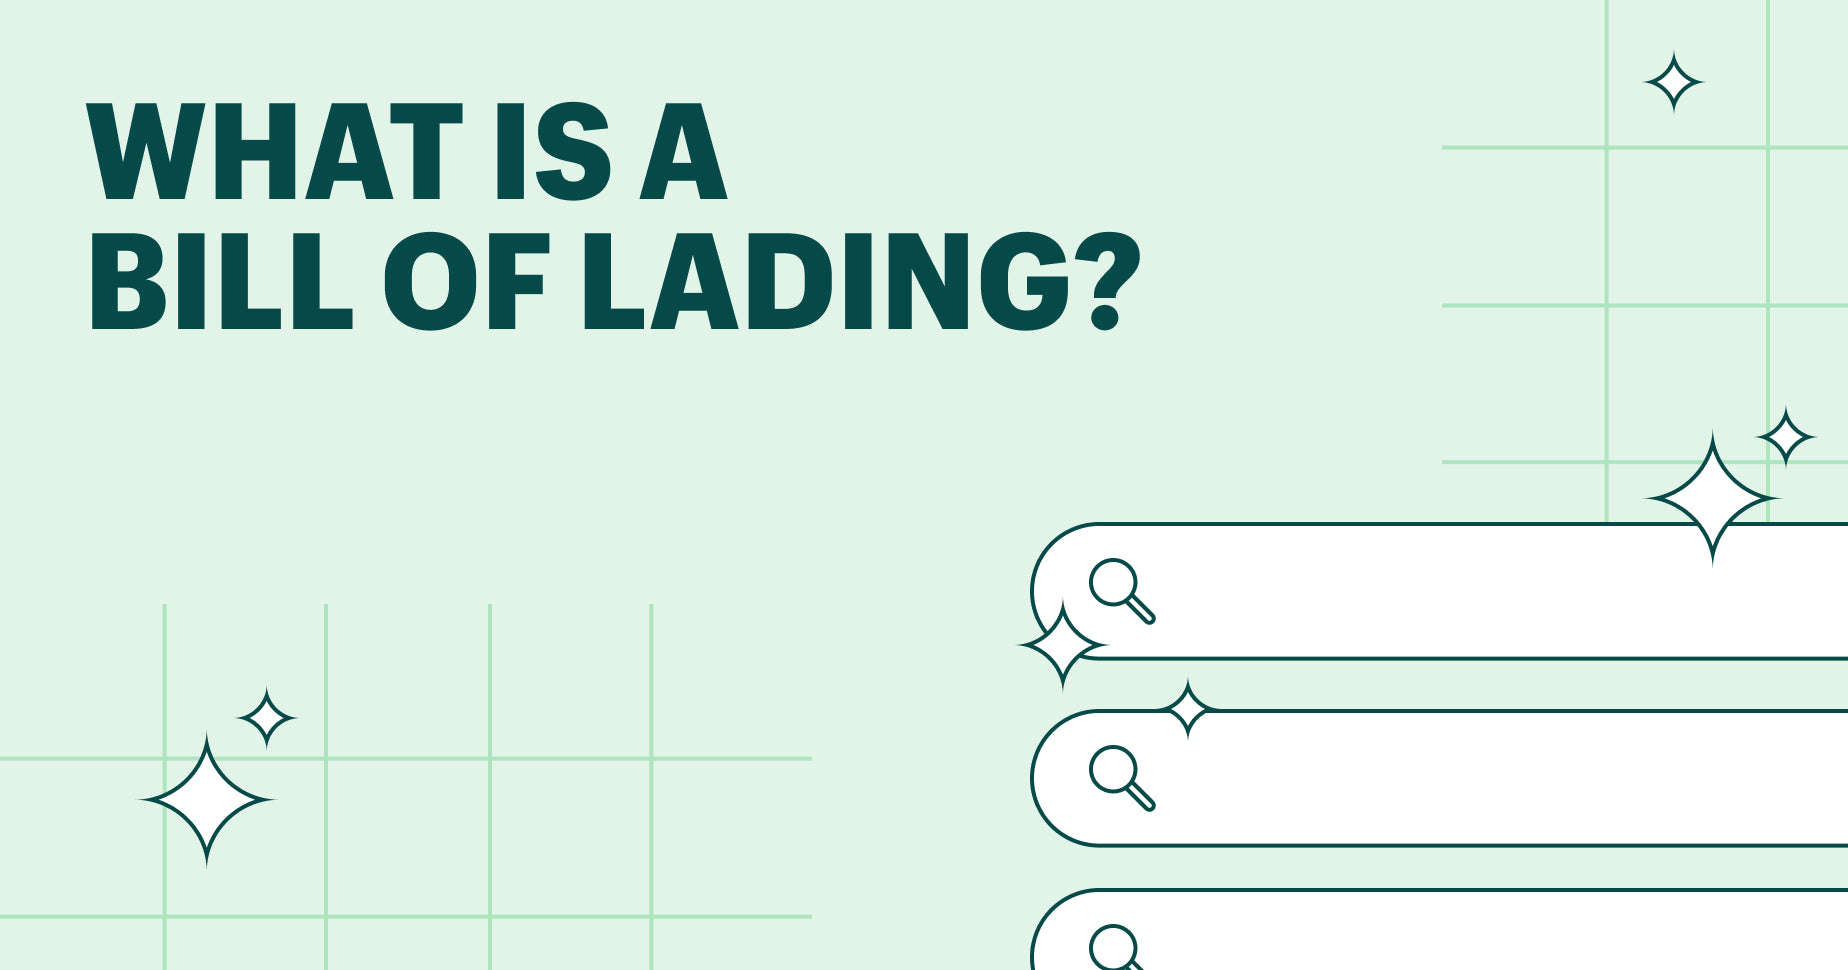 What is a bill of lading?